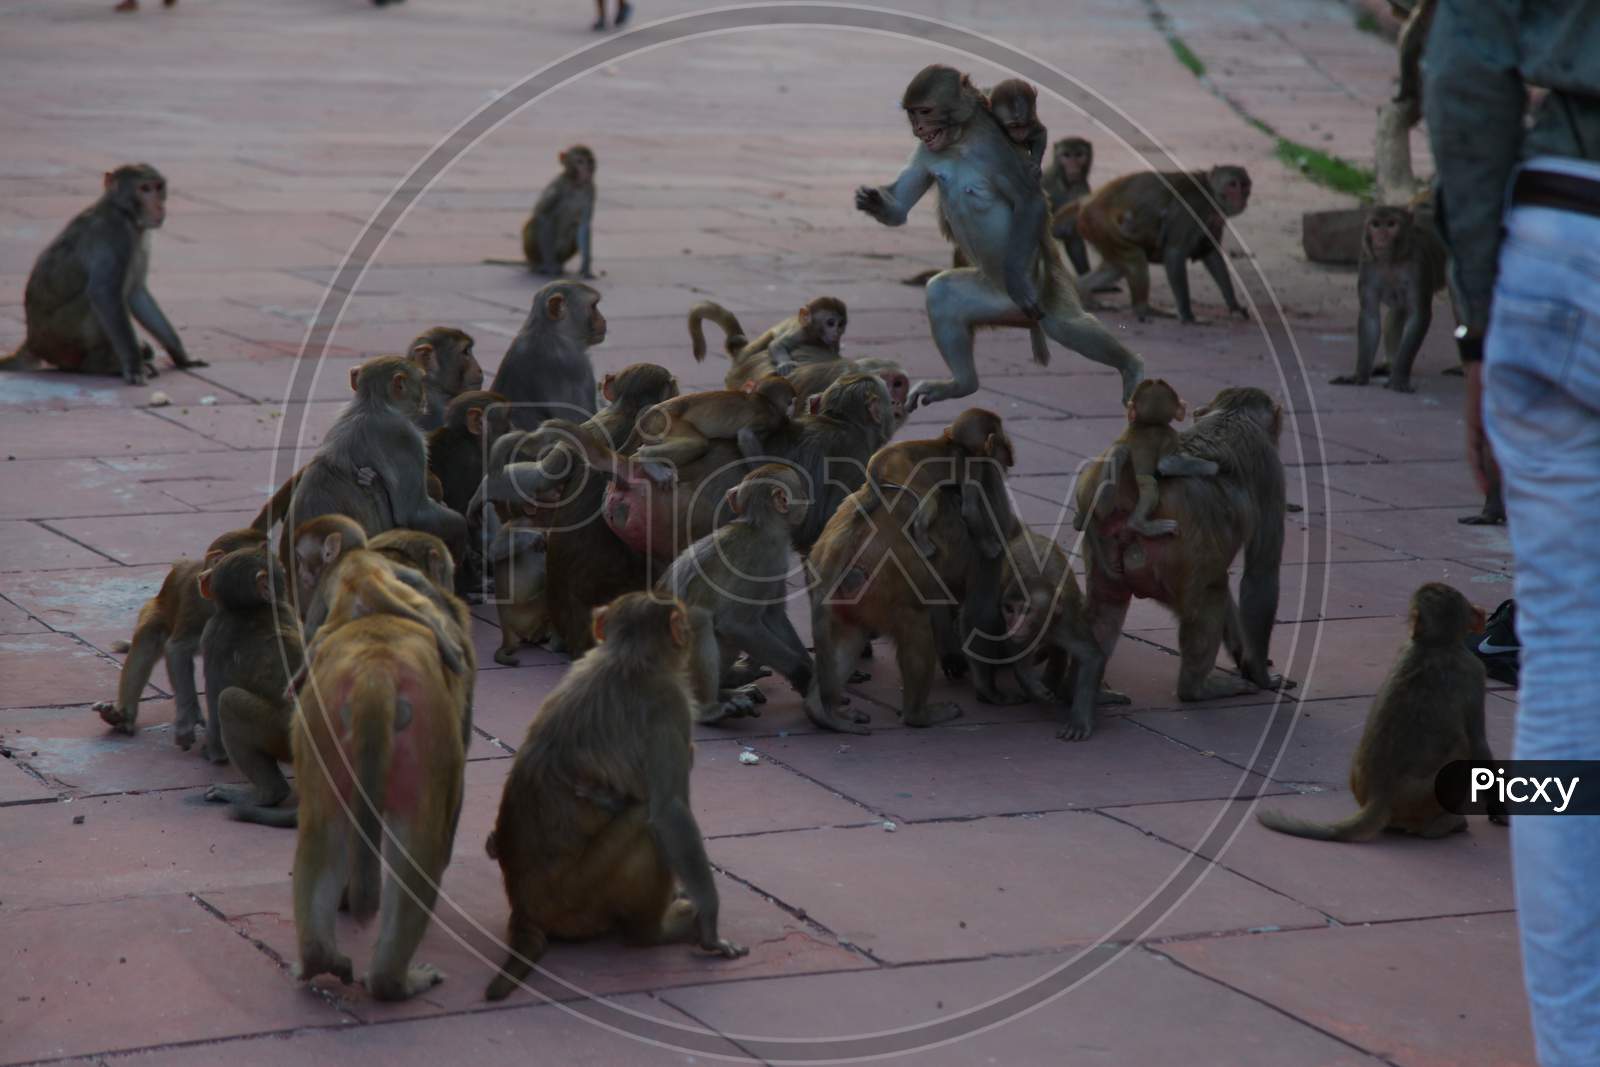 A herd of monkeys eating with their children